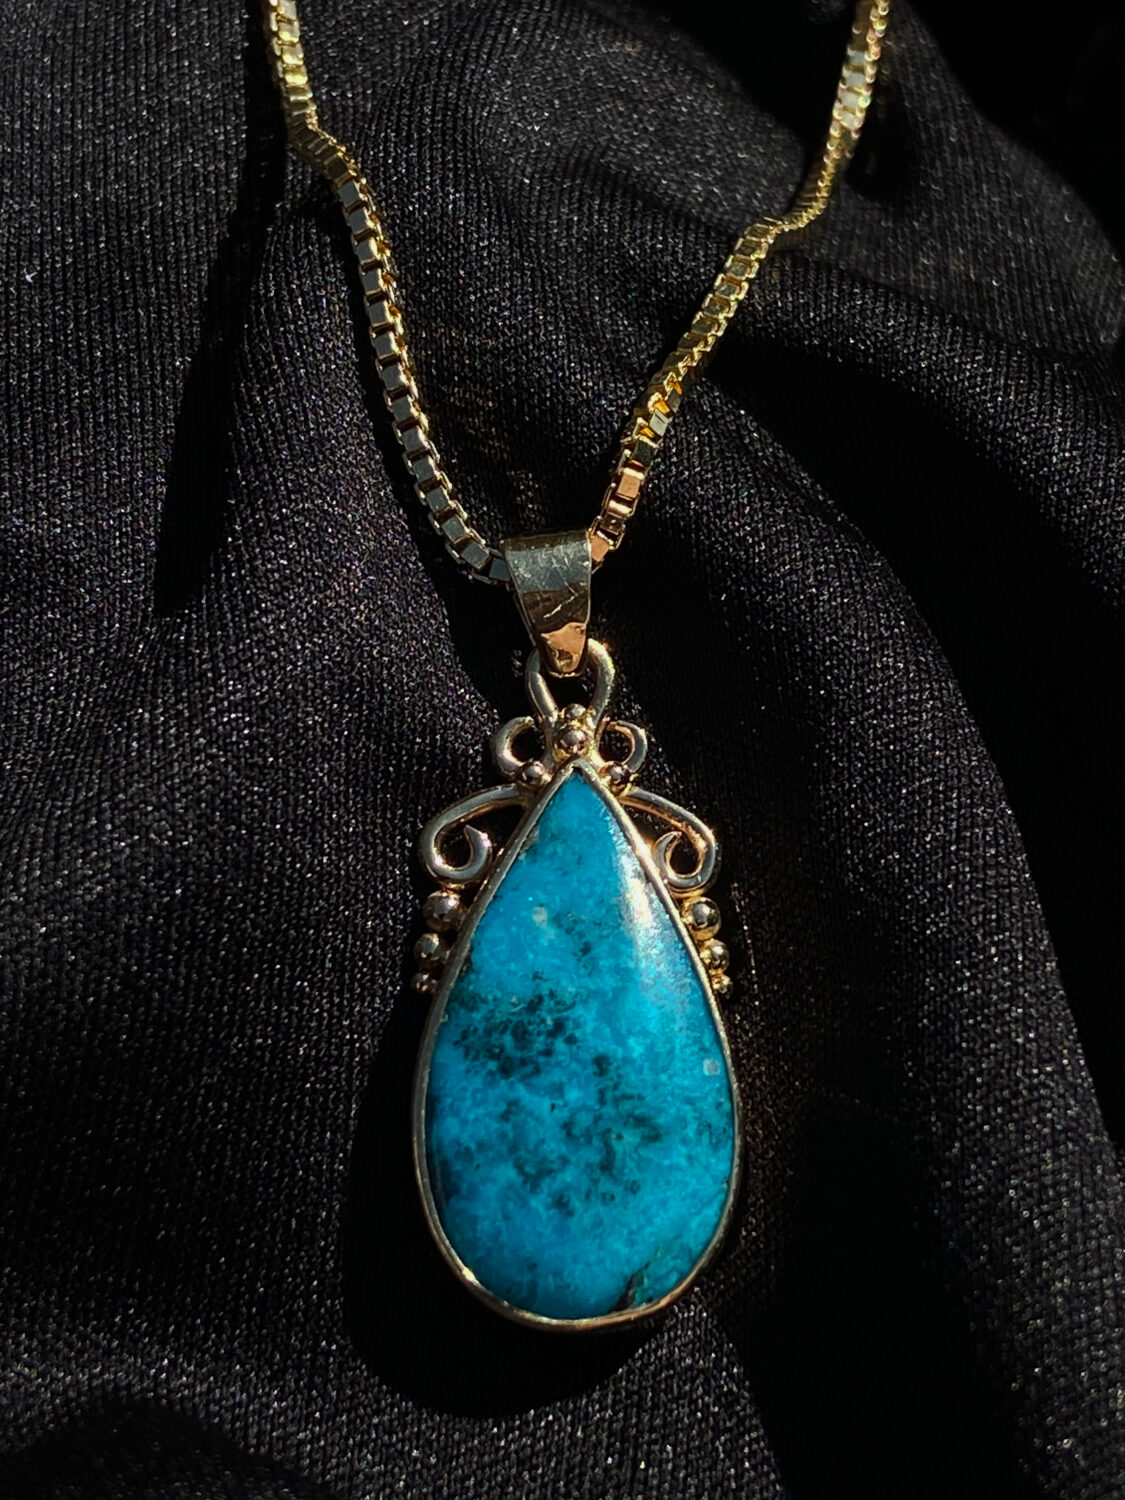 Jane Austen Beautiful Gold and Turquoise Pendant Necklace - Jane Austen  Gifts